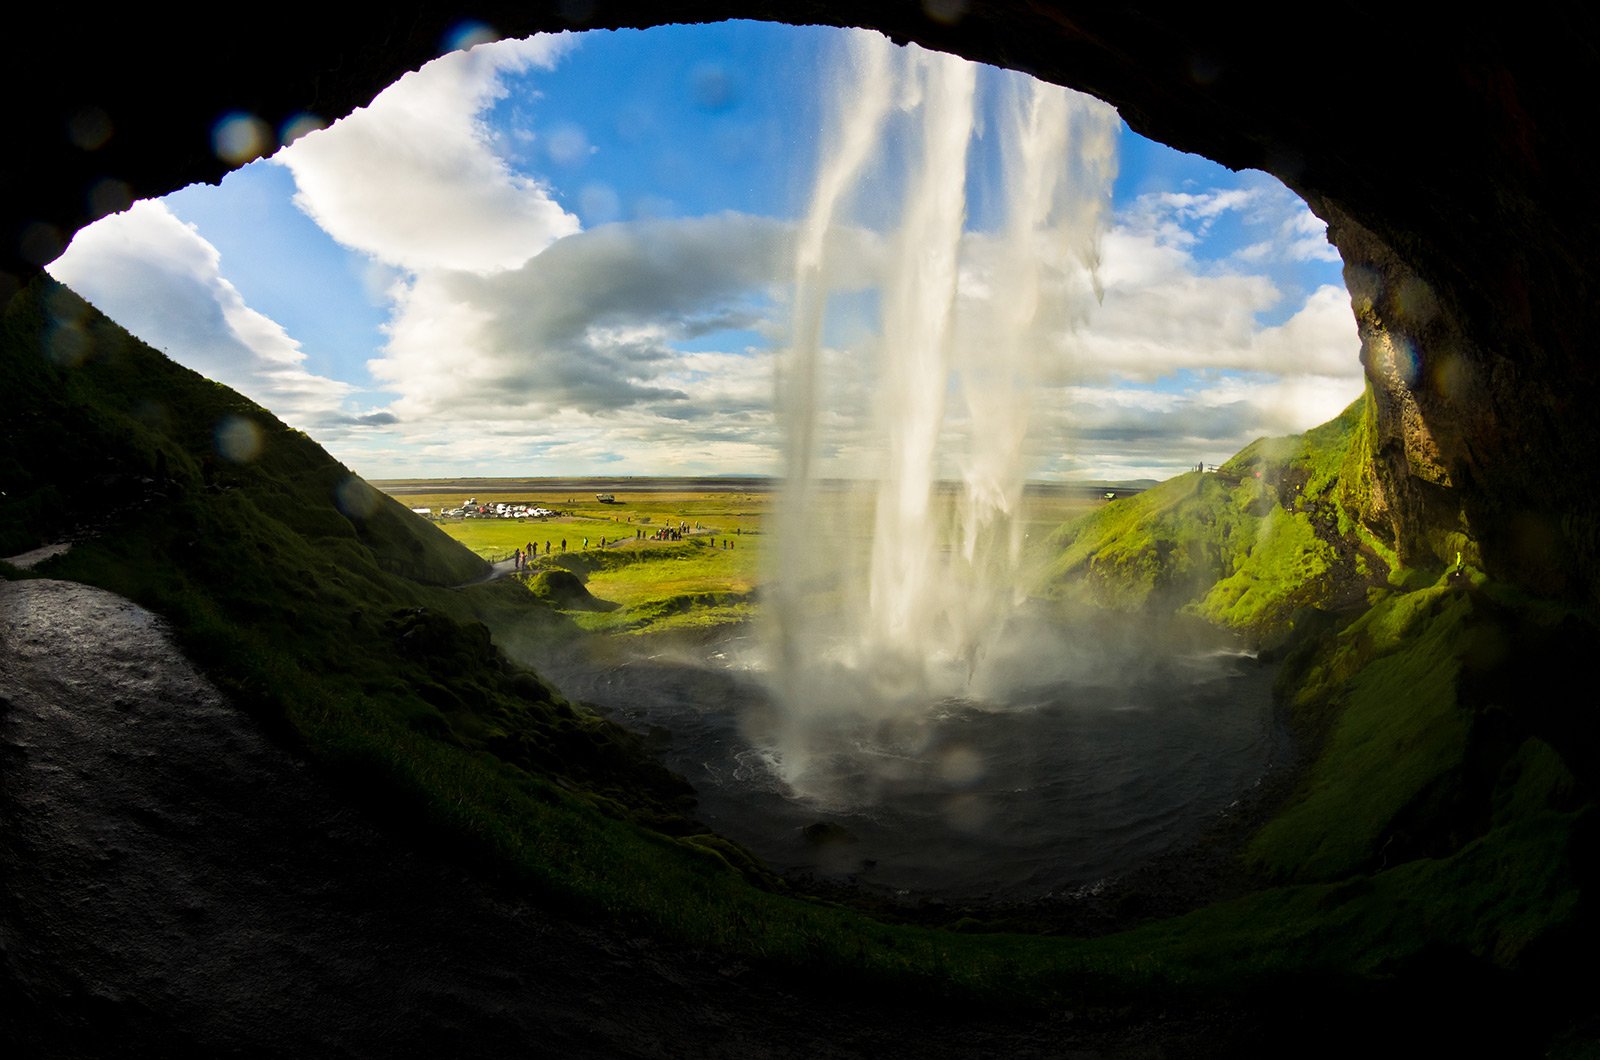 How to see the waterfall from the inside in Reykjavik